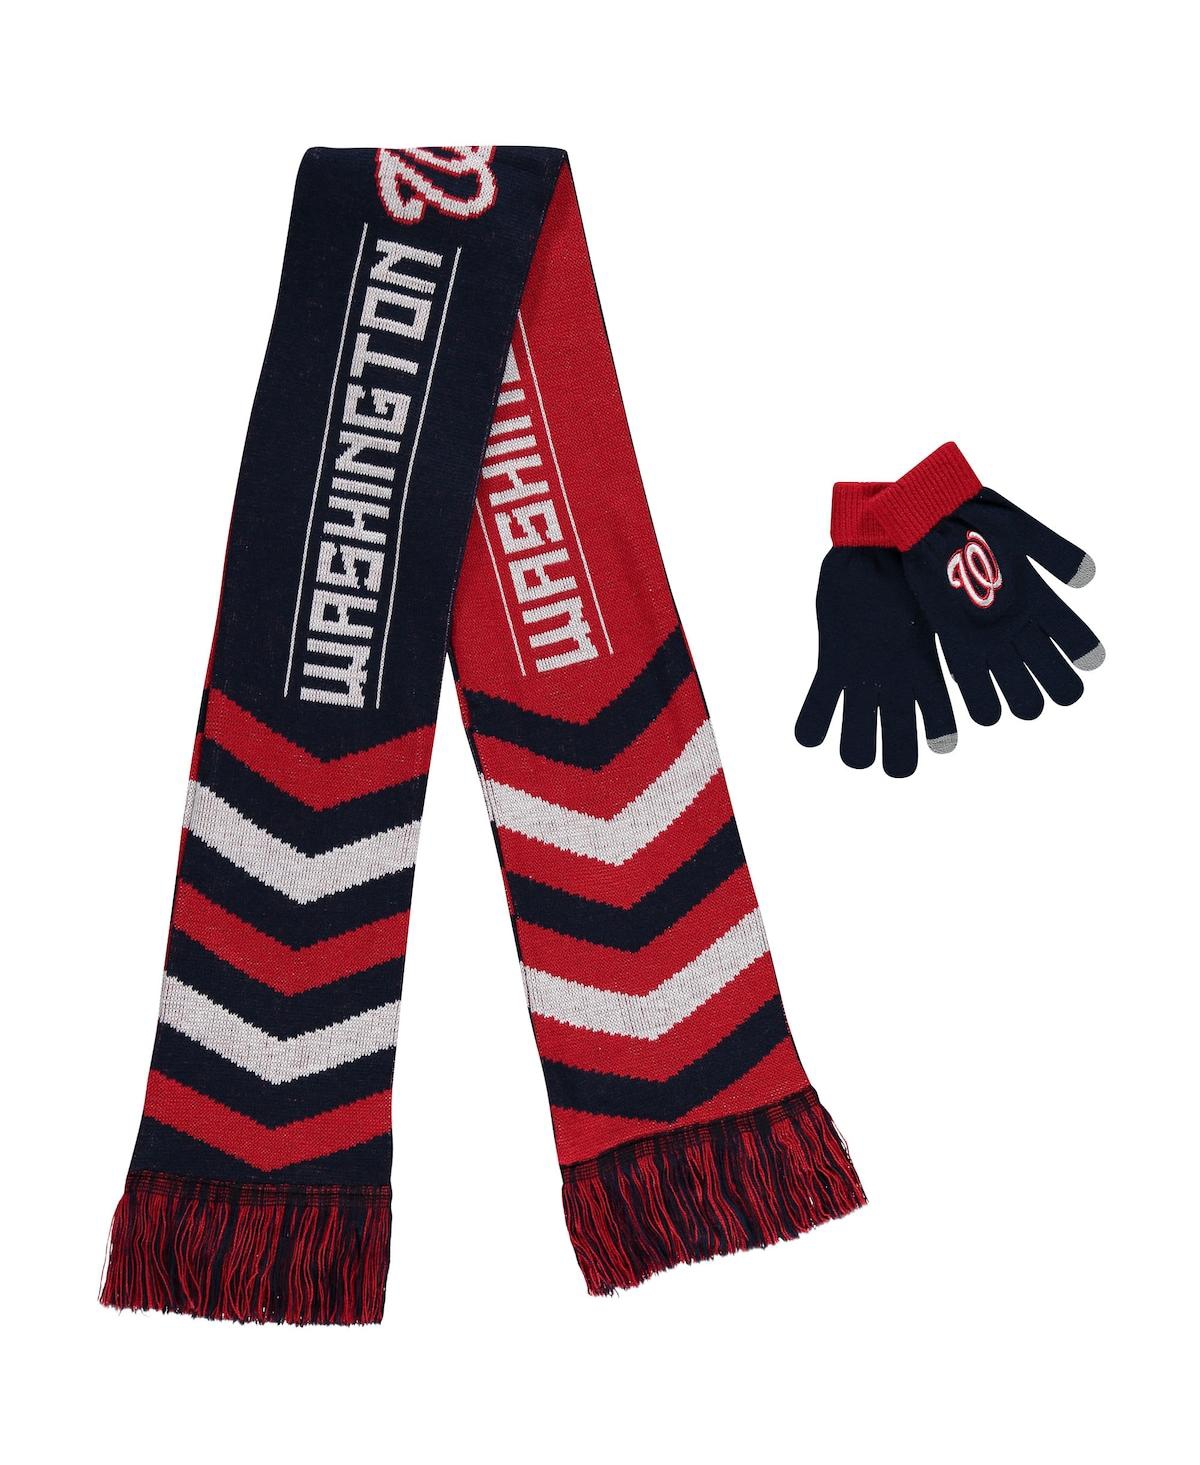 Men's and Women's Foco Navy Washington Nationals Glove and Scarf Combo Set - Navy